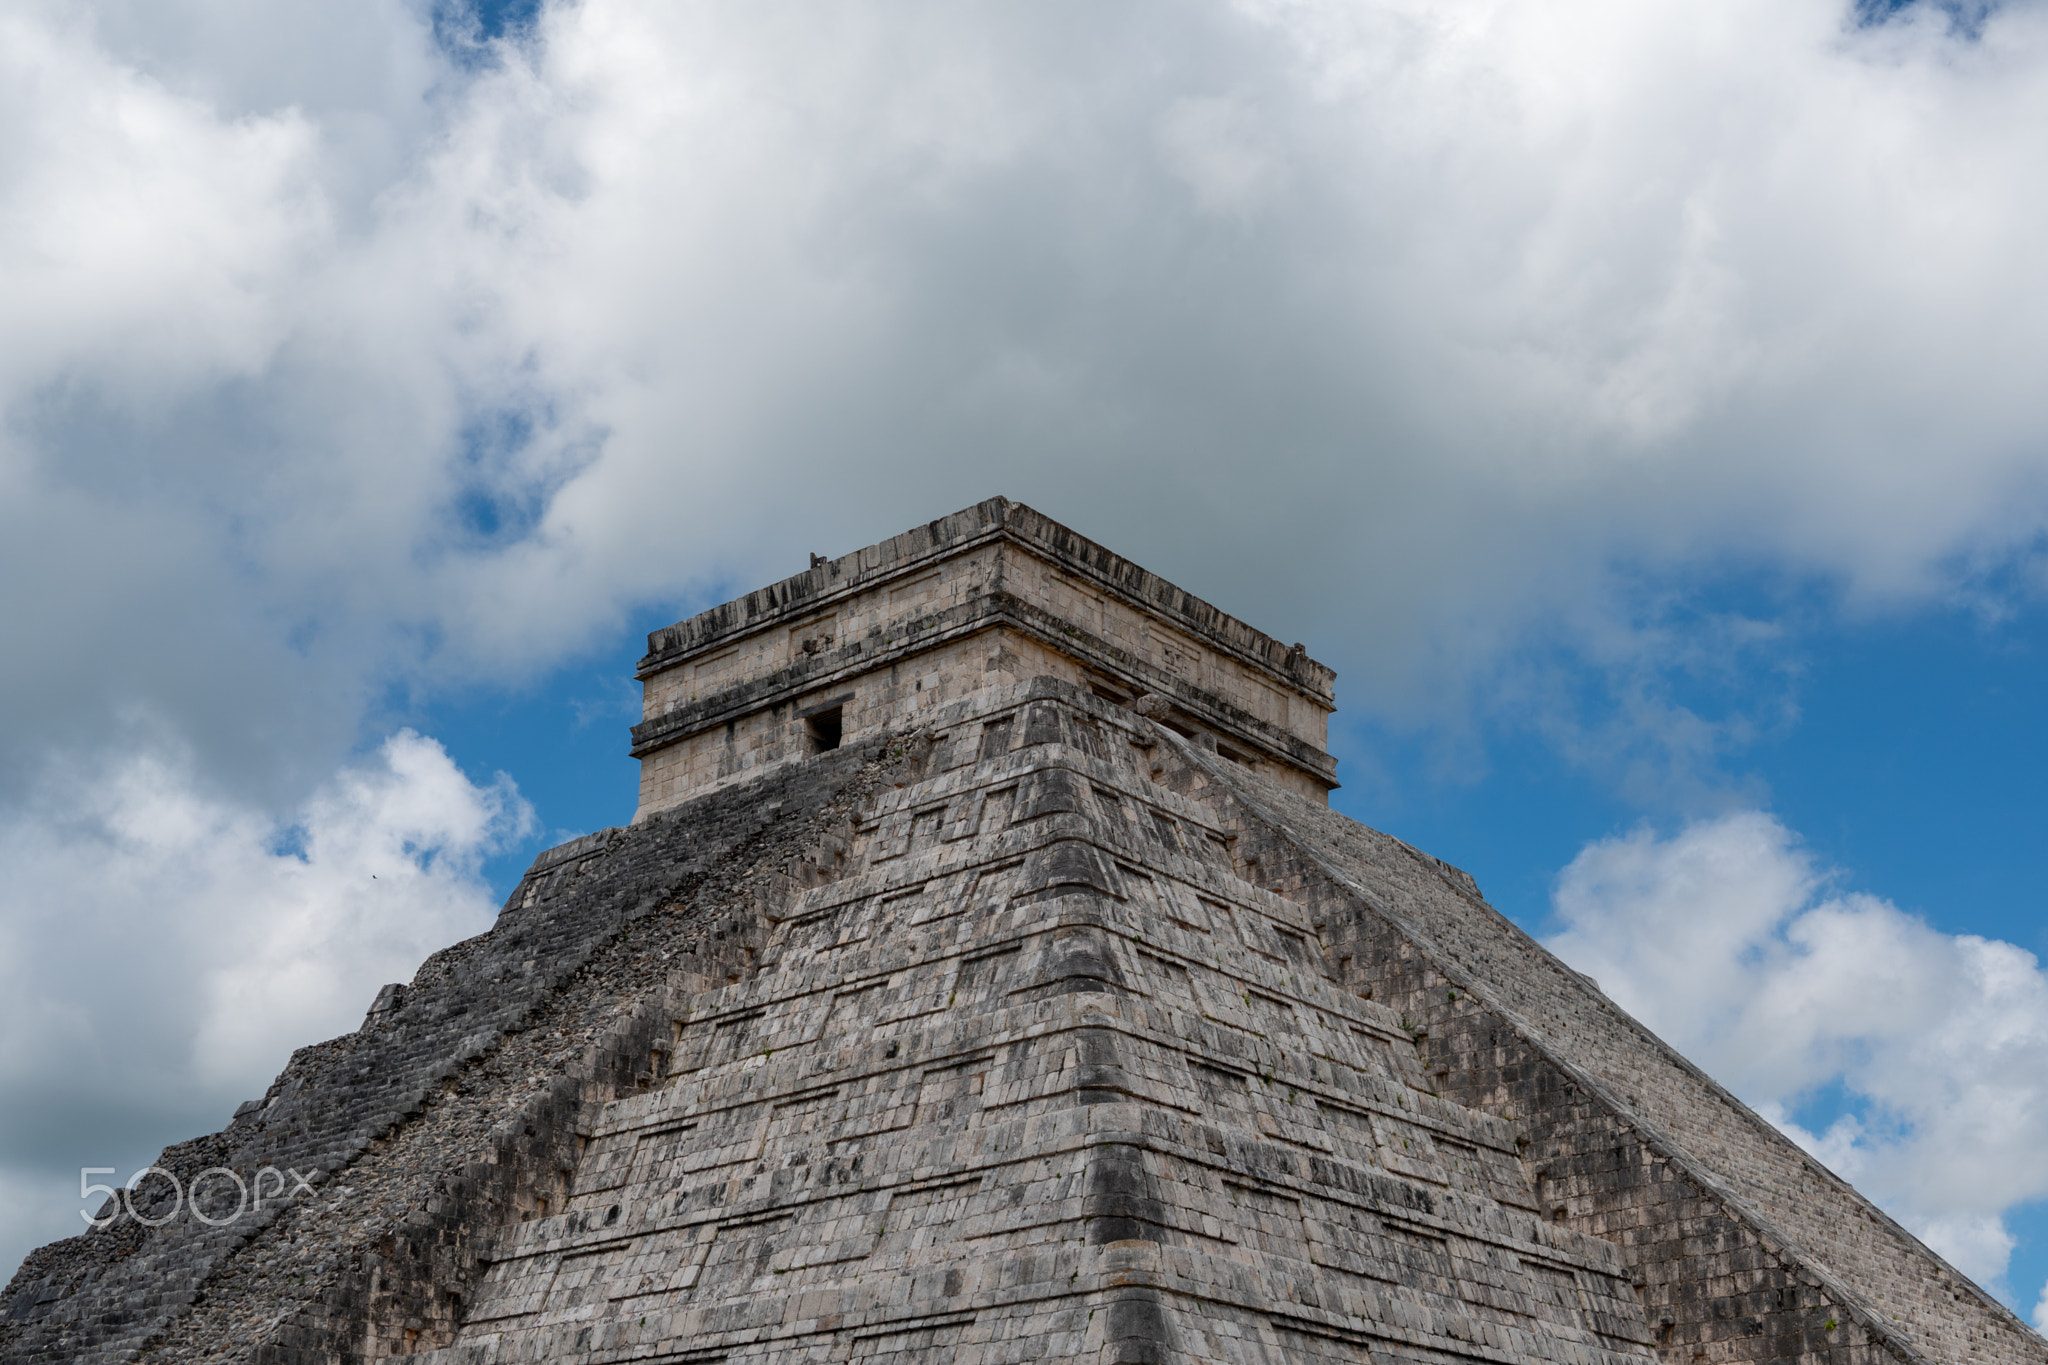 Chichen Itza is an ancient Mayan city site